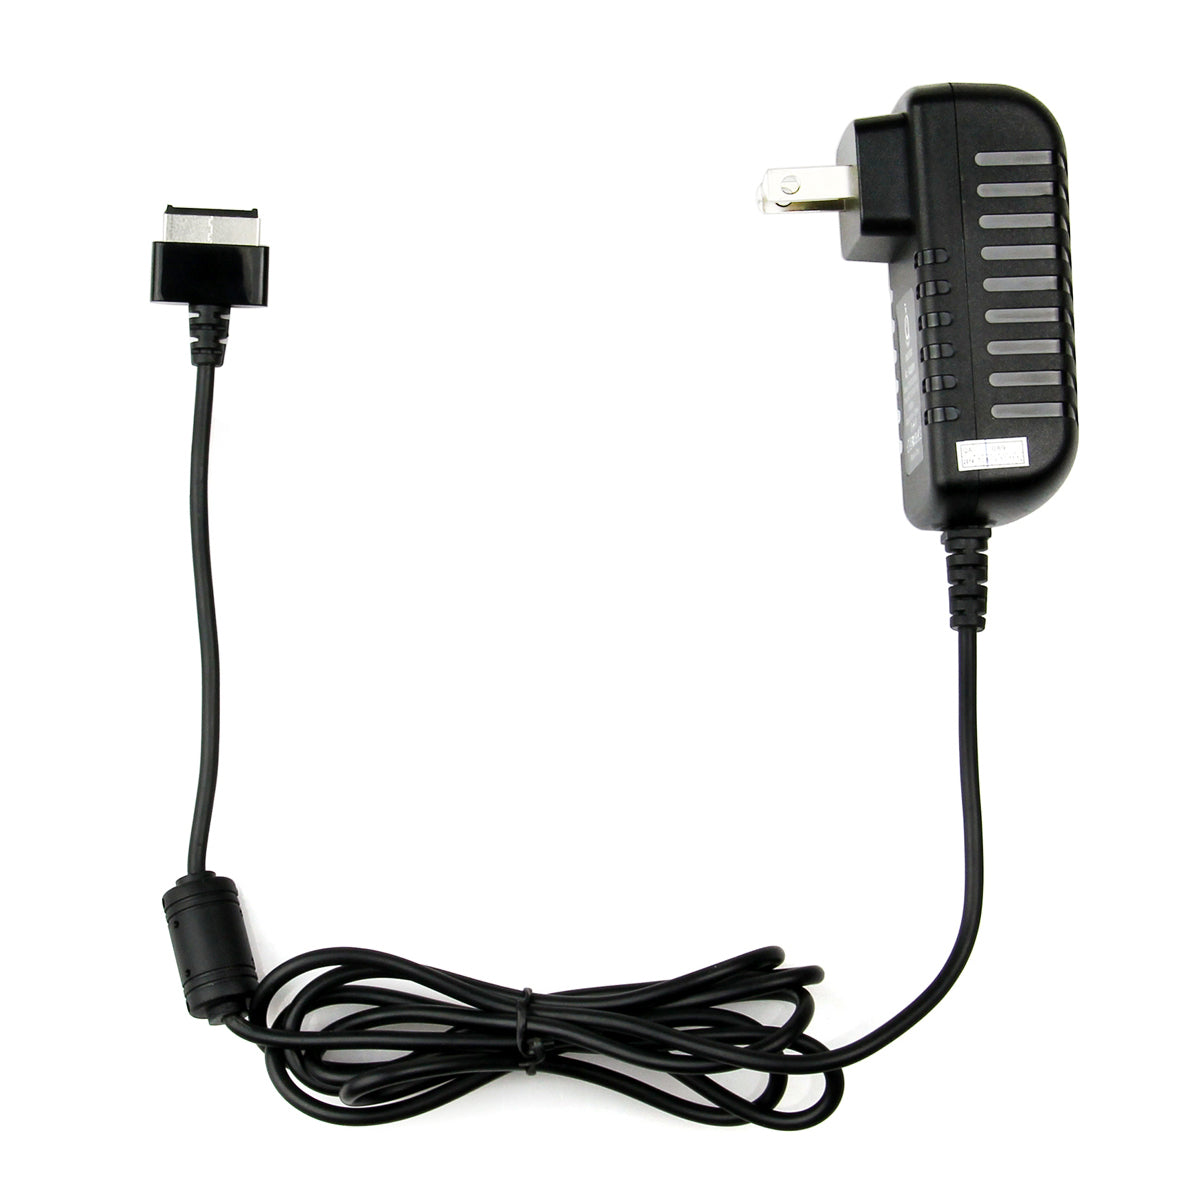 AC Adapter Charger for ASUS TF201 C1 Eee Pad.